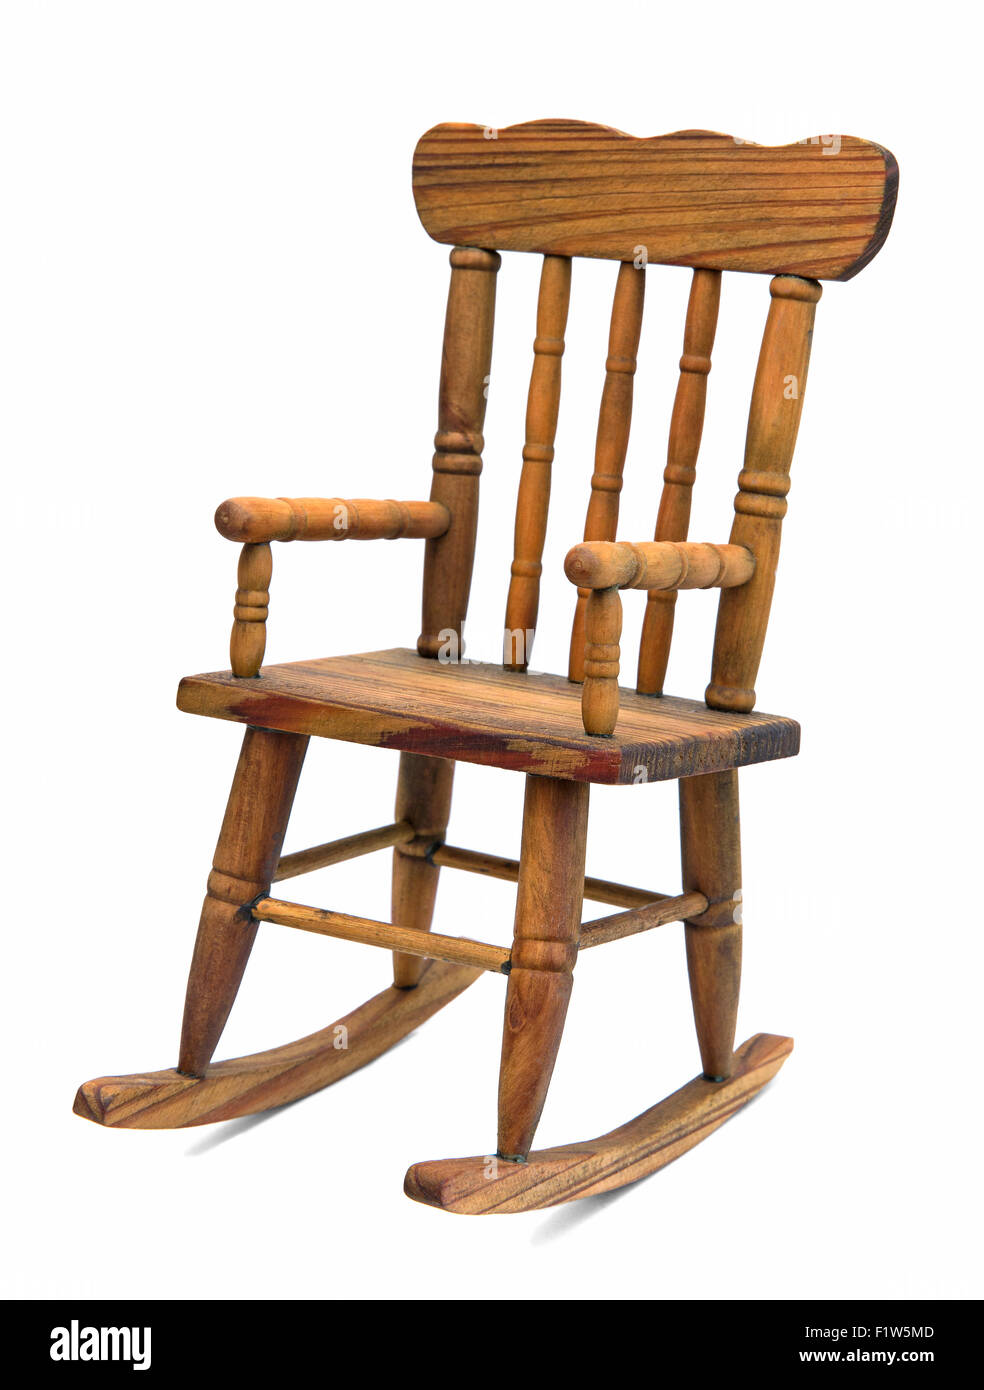 Wooden rocking chair Stock Photo